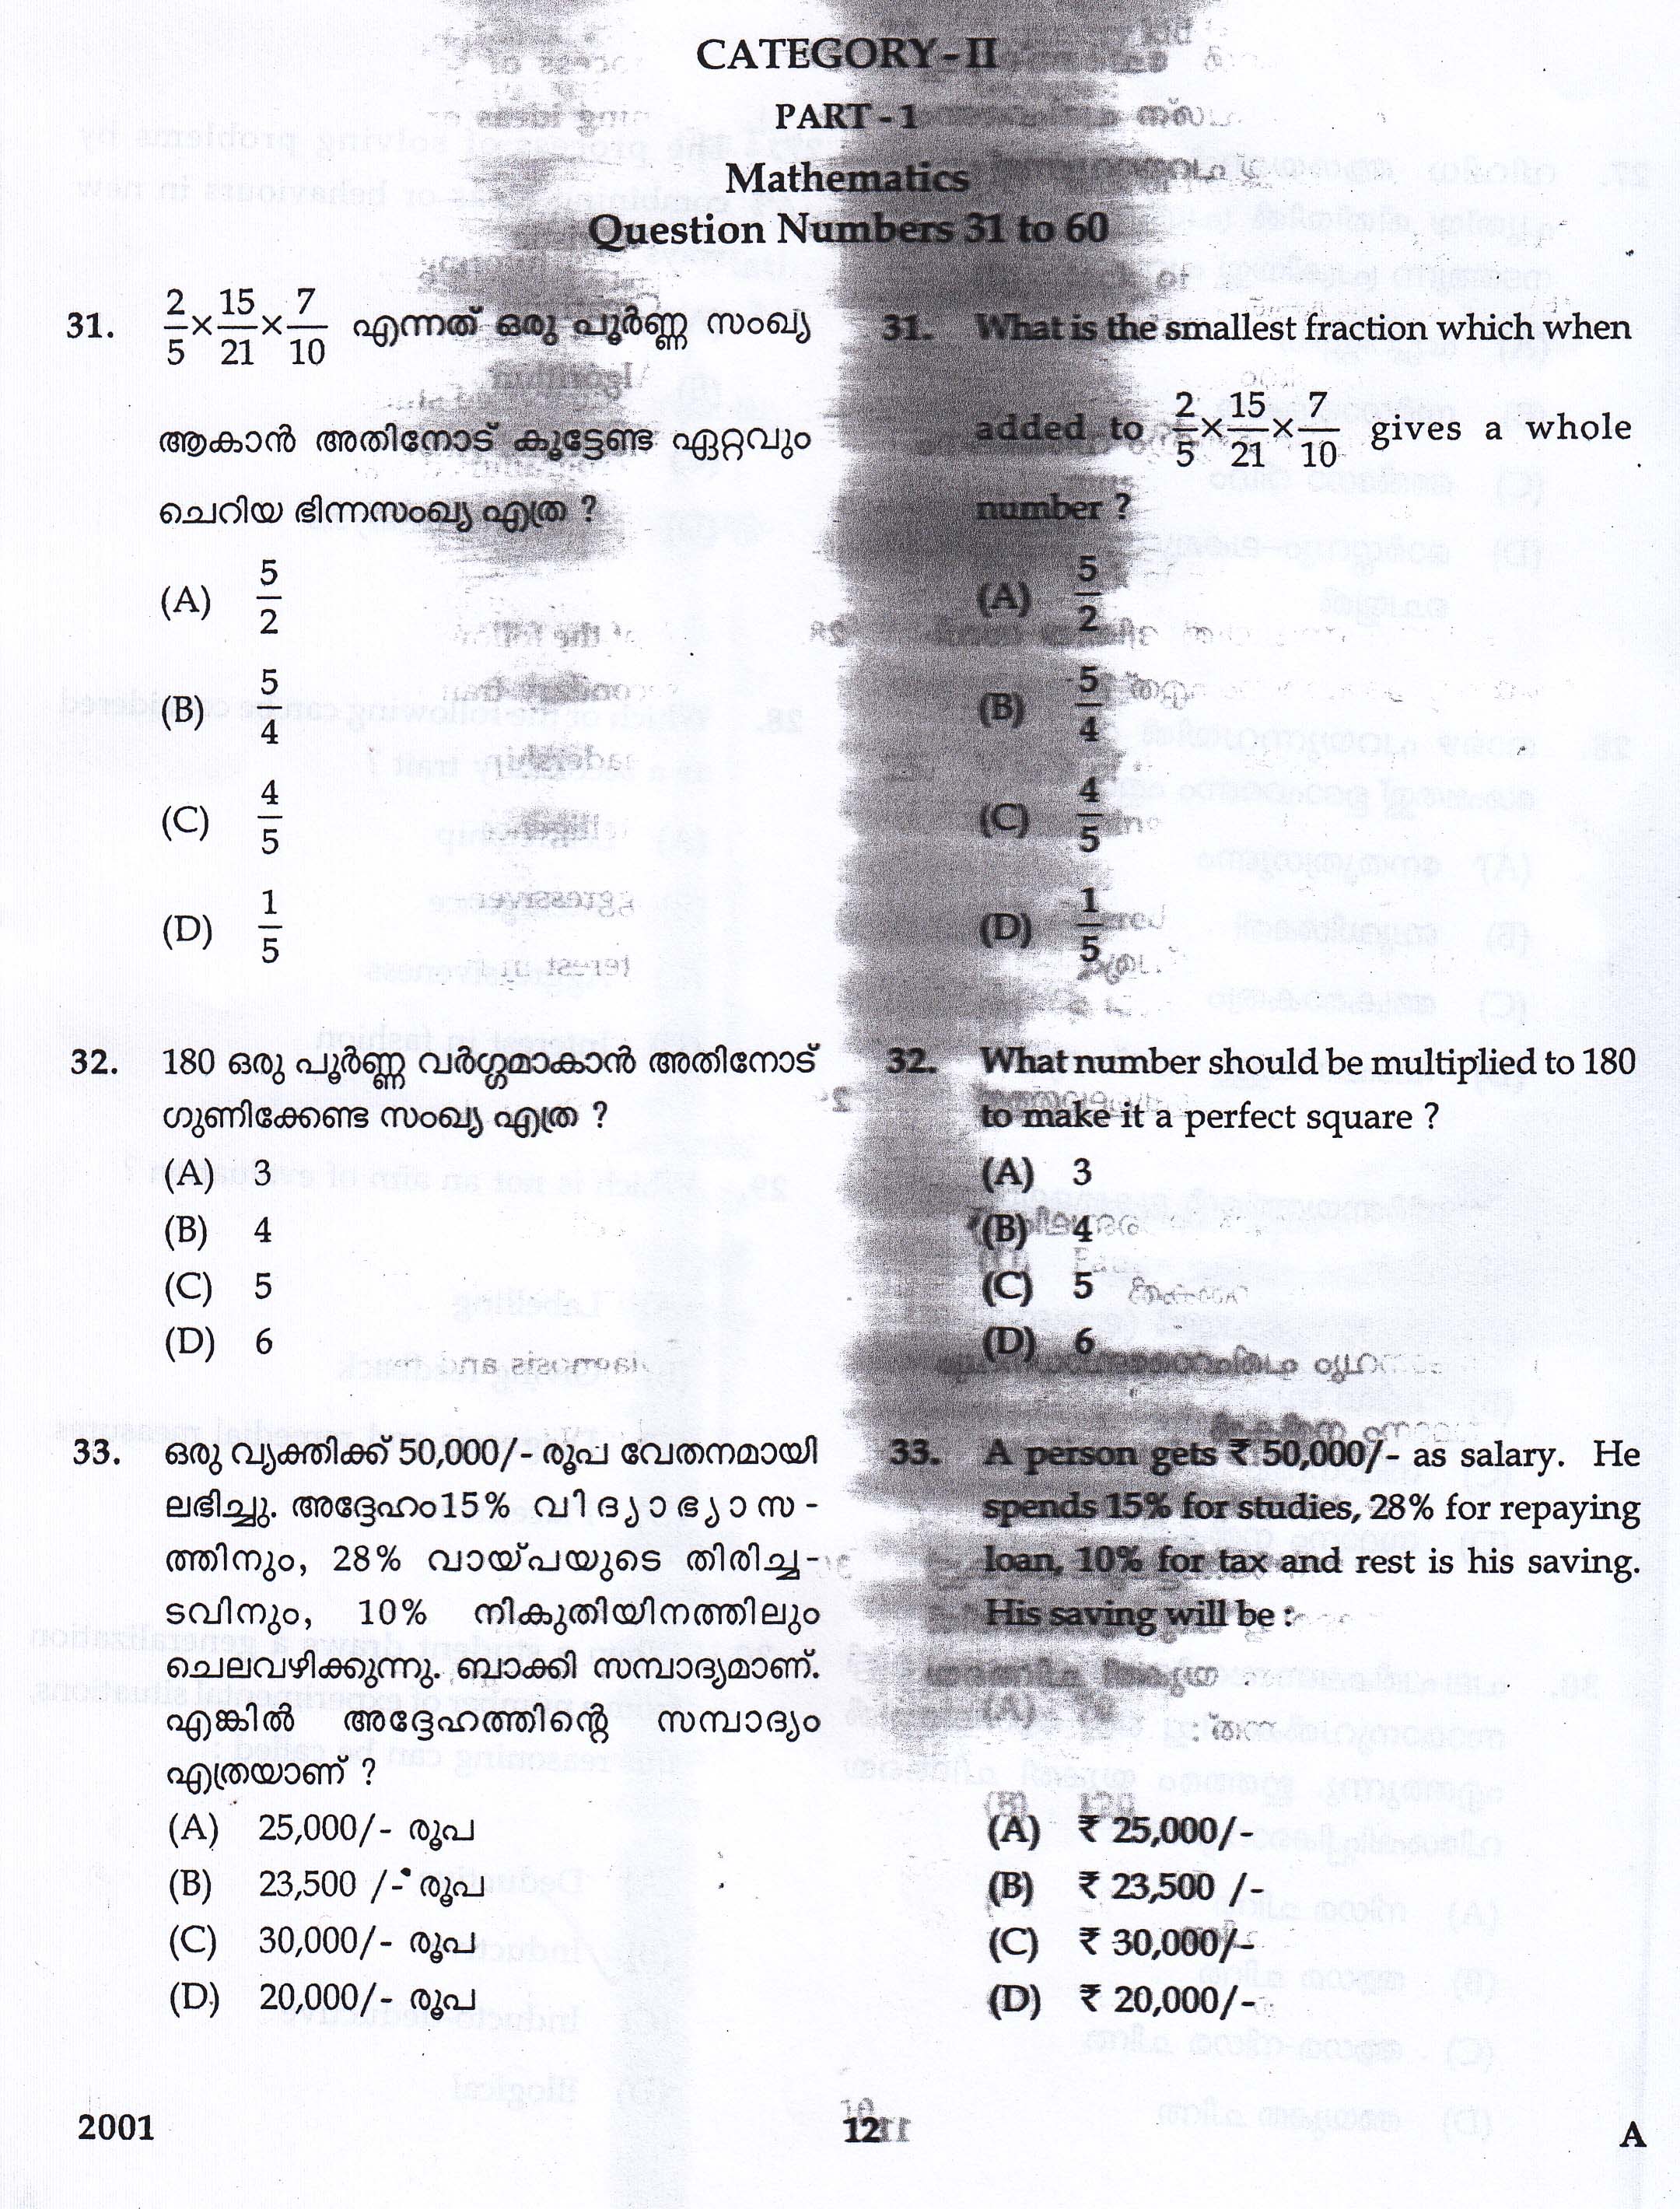 KTET Category II Part 1 Mathematics Question Paper with Answers December 2017 1